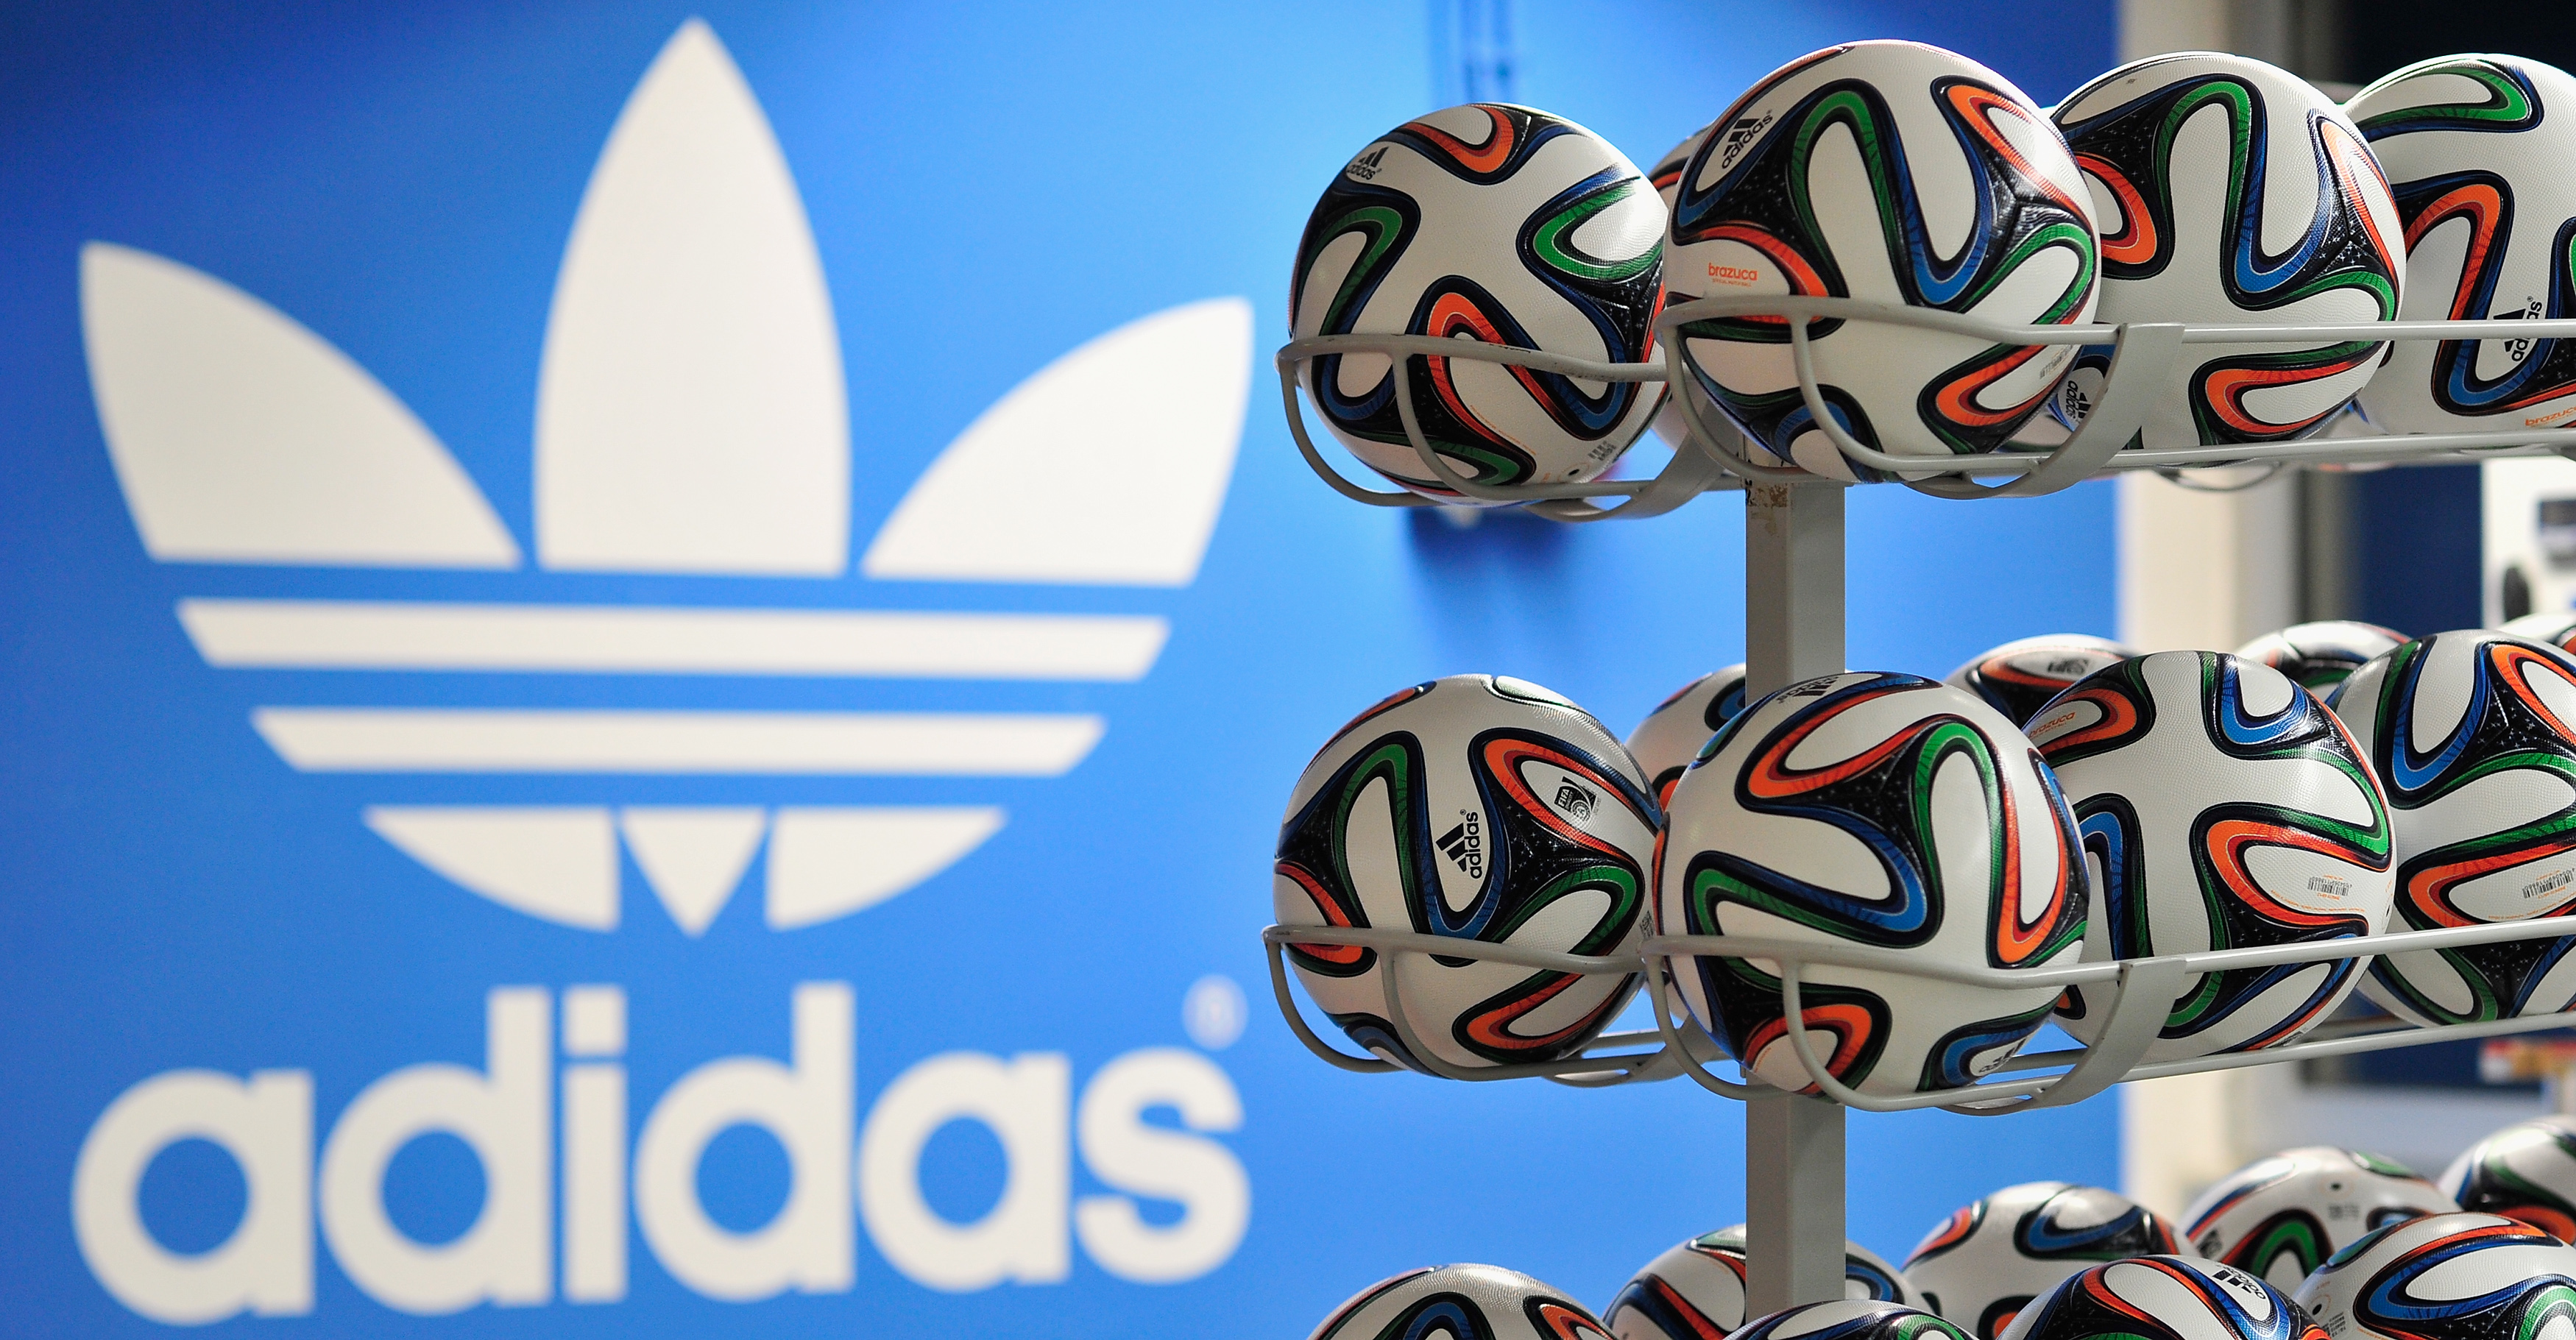 Brazuca match balls for the FIFA World Cup 2014 lie in a rack in front of the adidas logo on December 6, 2013 in Scheinfeld near Herzogenaurach, Germany. (Lennart Preiss&mdash;Getty Images for adidas)